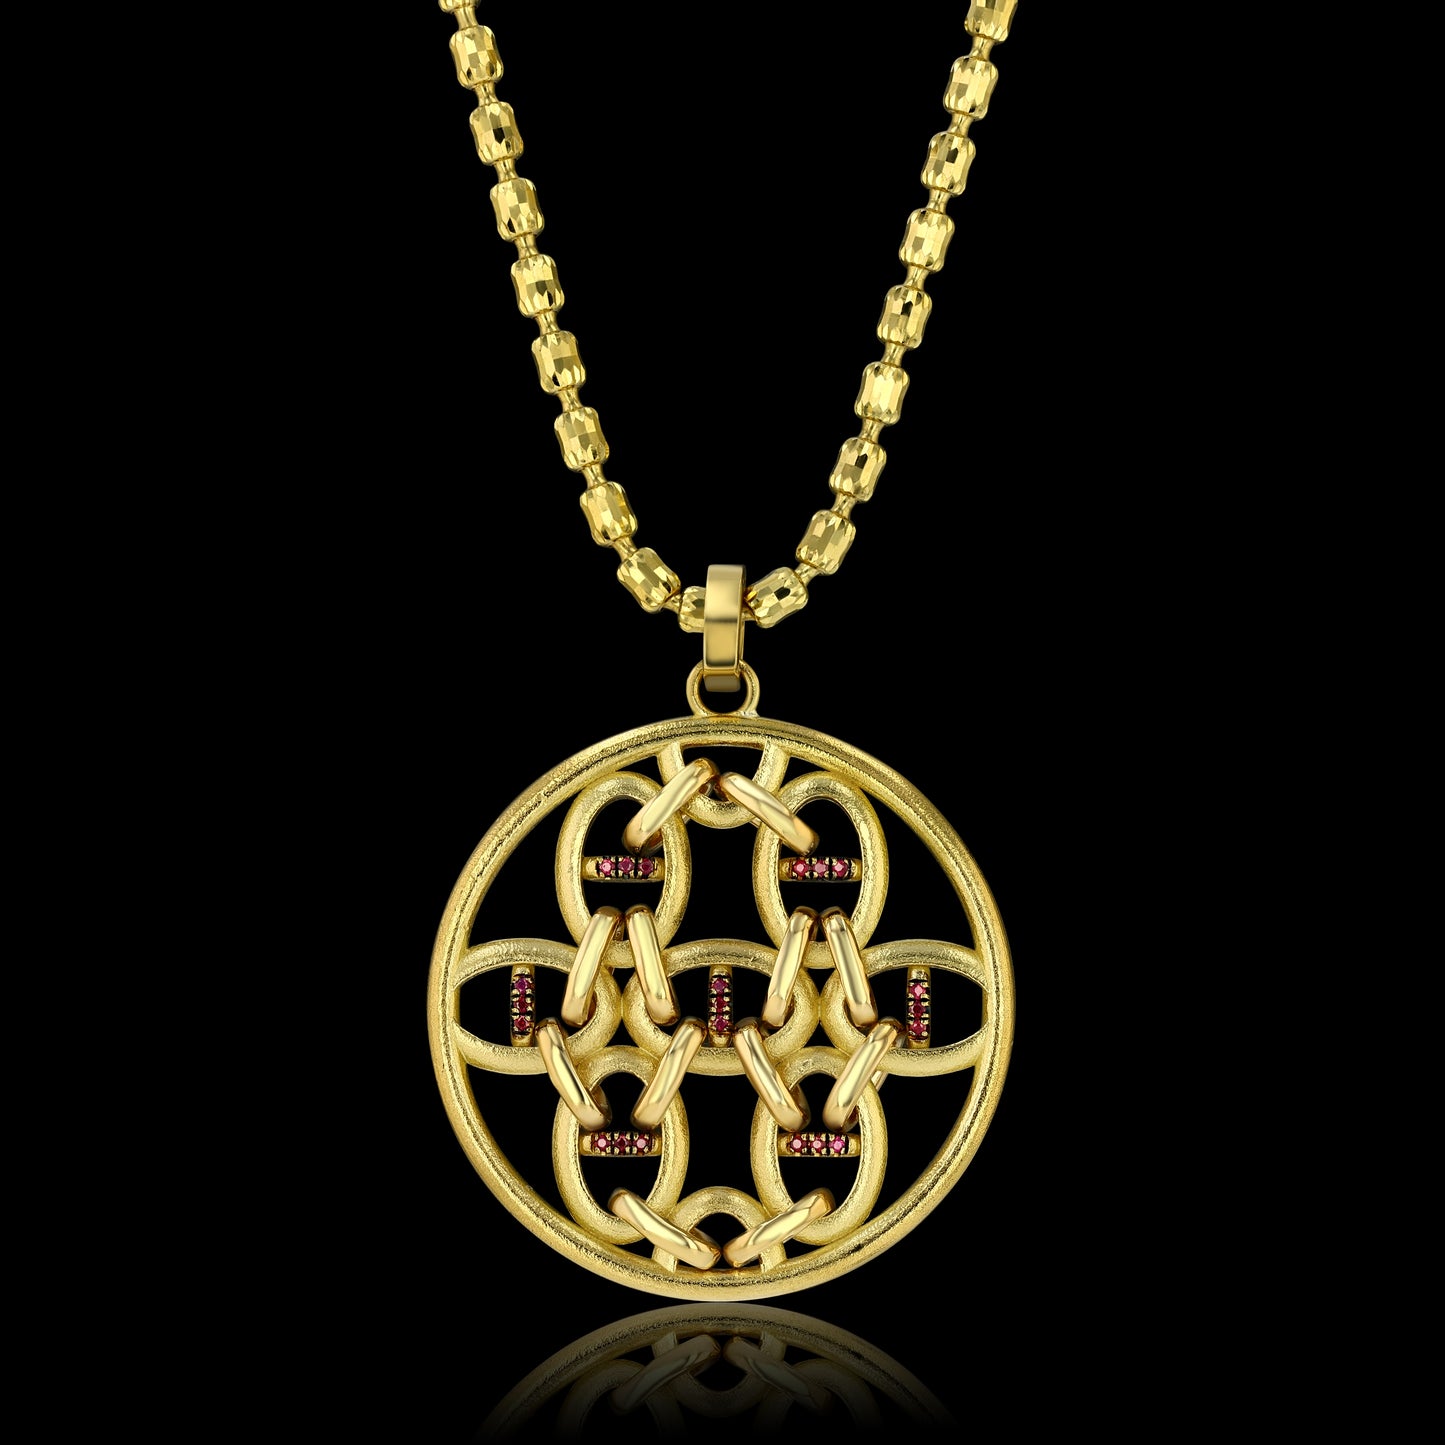 Round pendant, with geometrically placed horse bit shapes encrusted with diamonds on one side and rubies on the other, on an 18k yellow gold necklace.